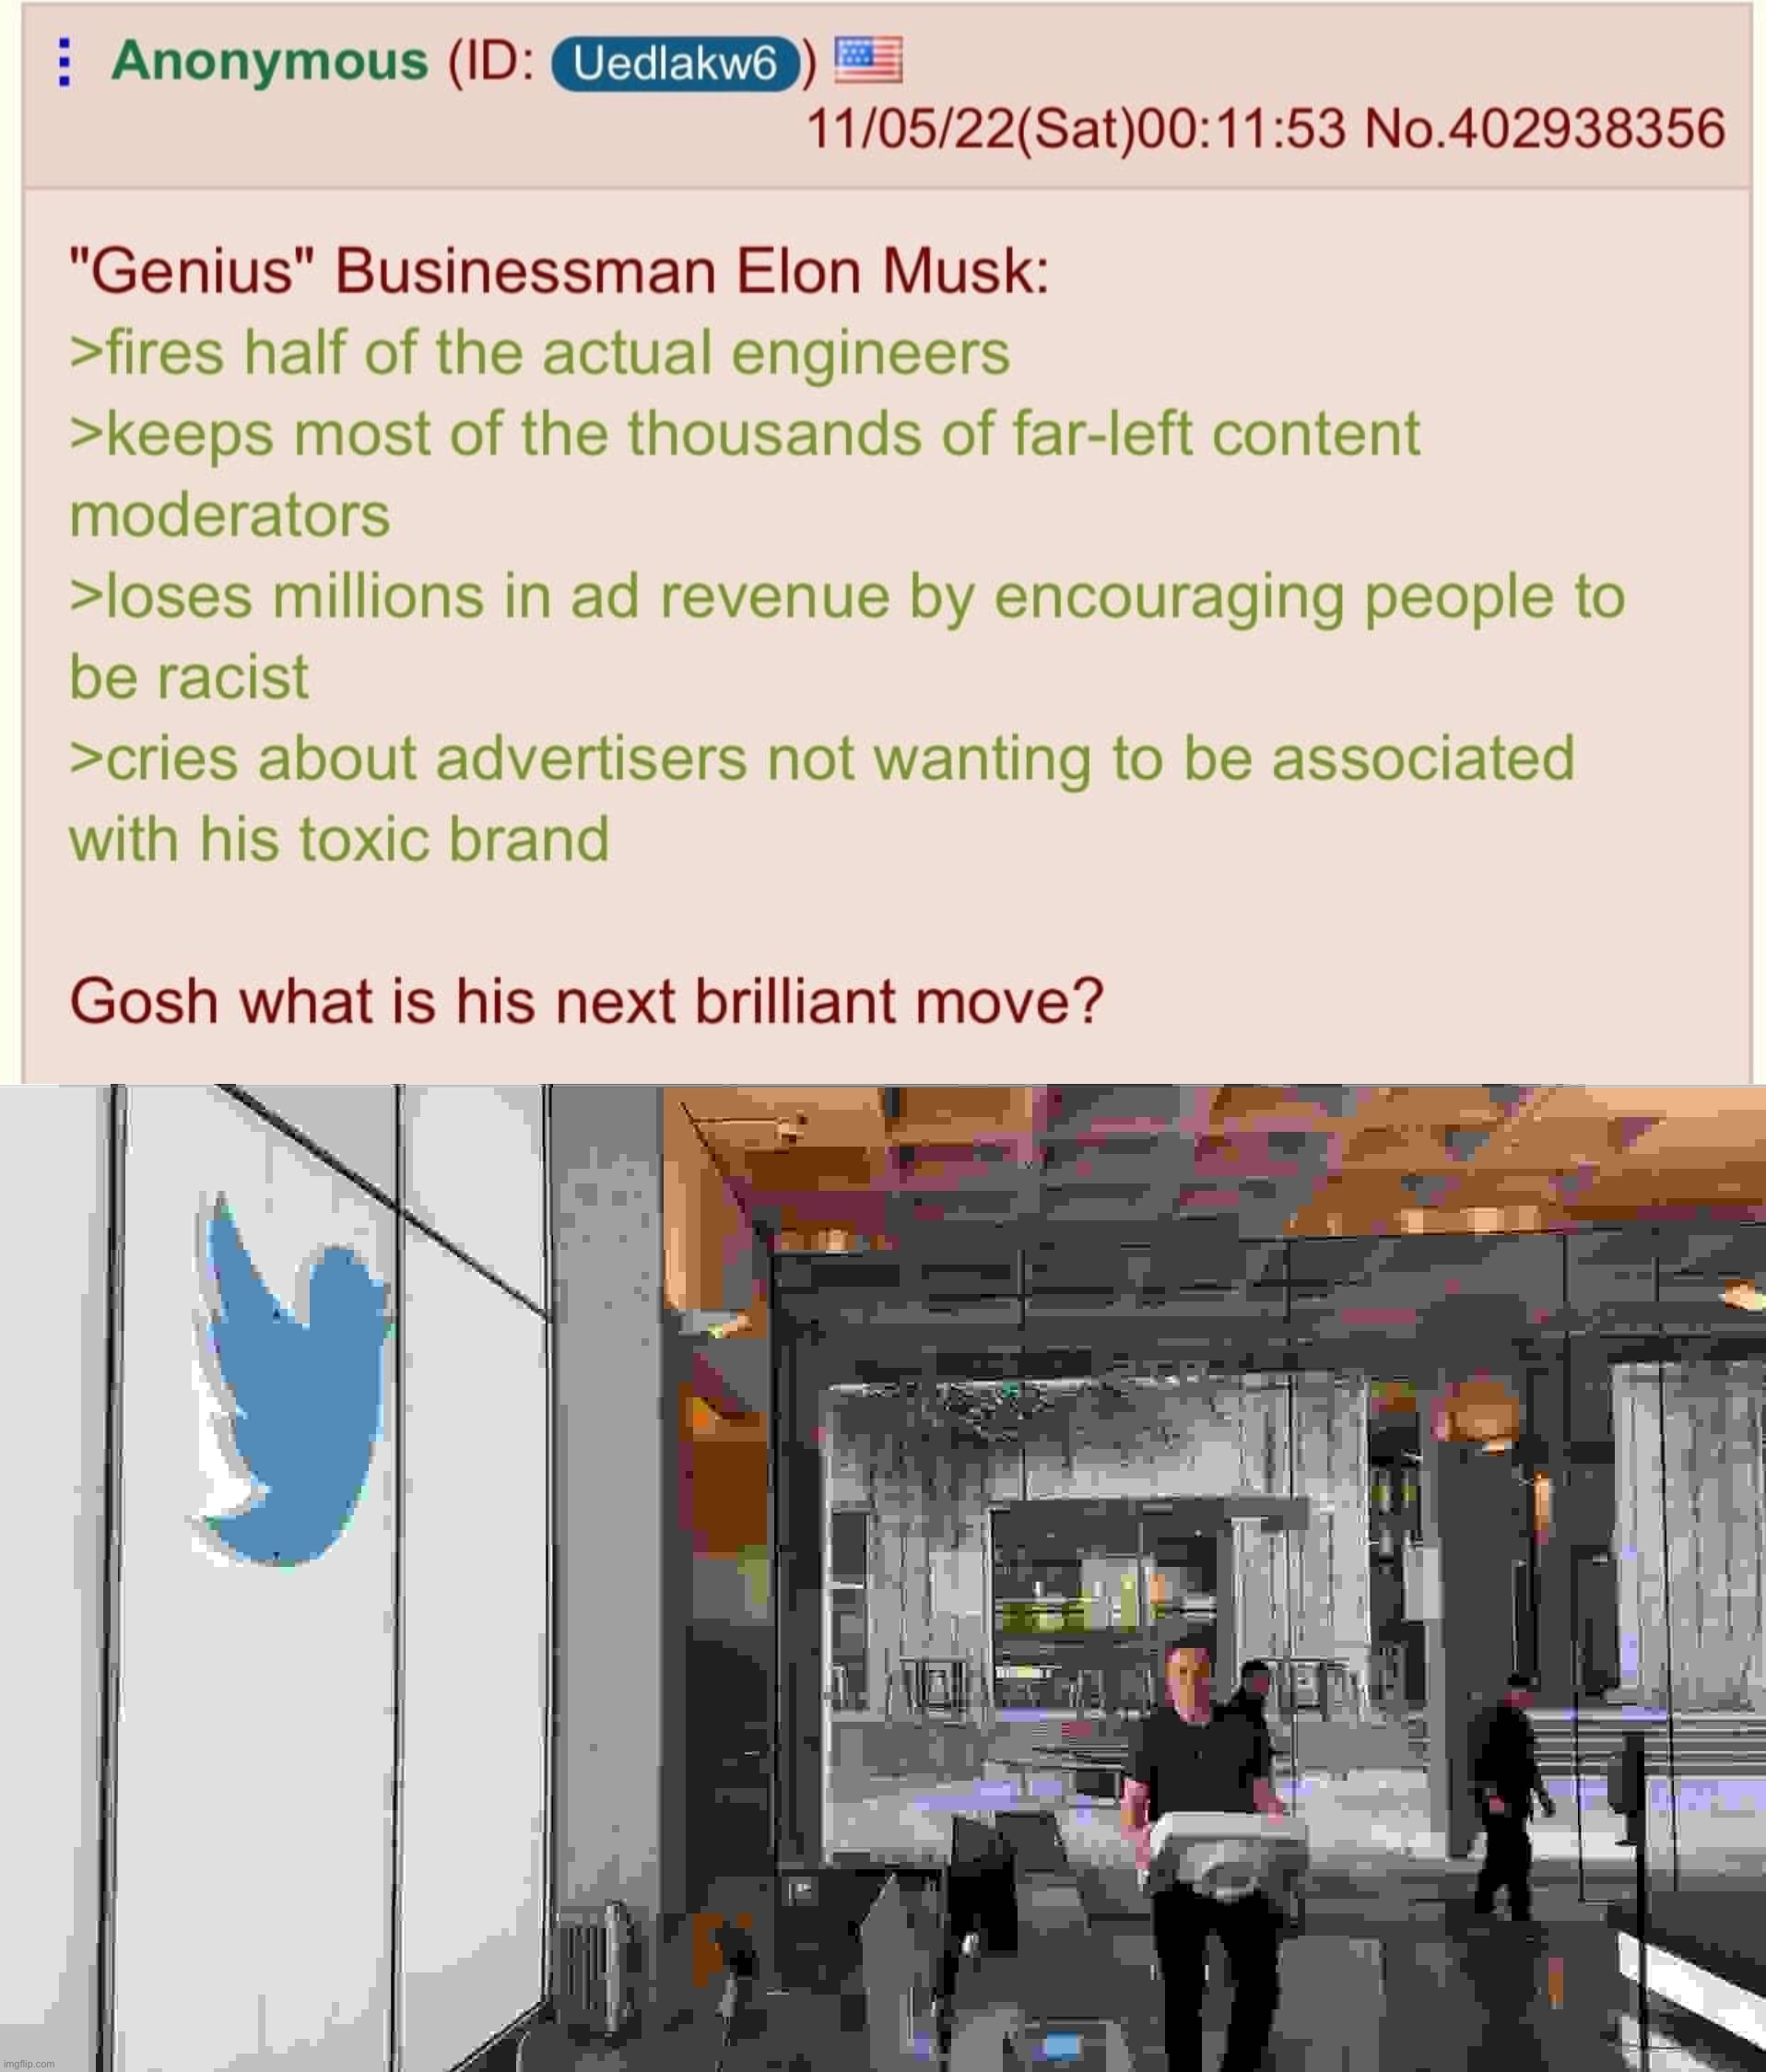 v rare right-wing Muskophobia | image tagged in elon musk twitter brilliant move,elon musk twitter sink jpeg max degrade,muskophobia,elon musk,twitter,free speech | made w/ Imgflip meme maker